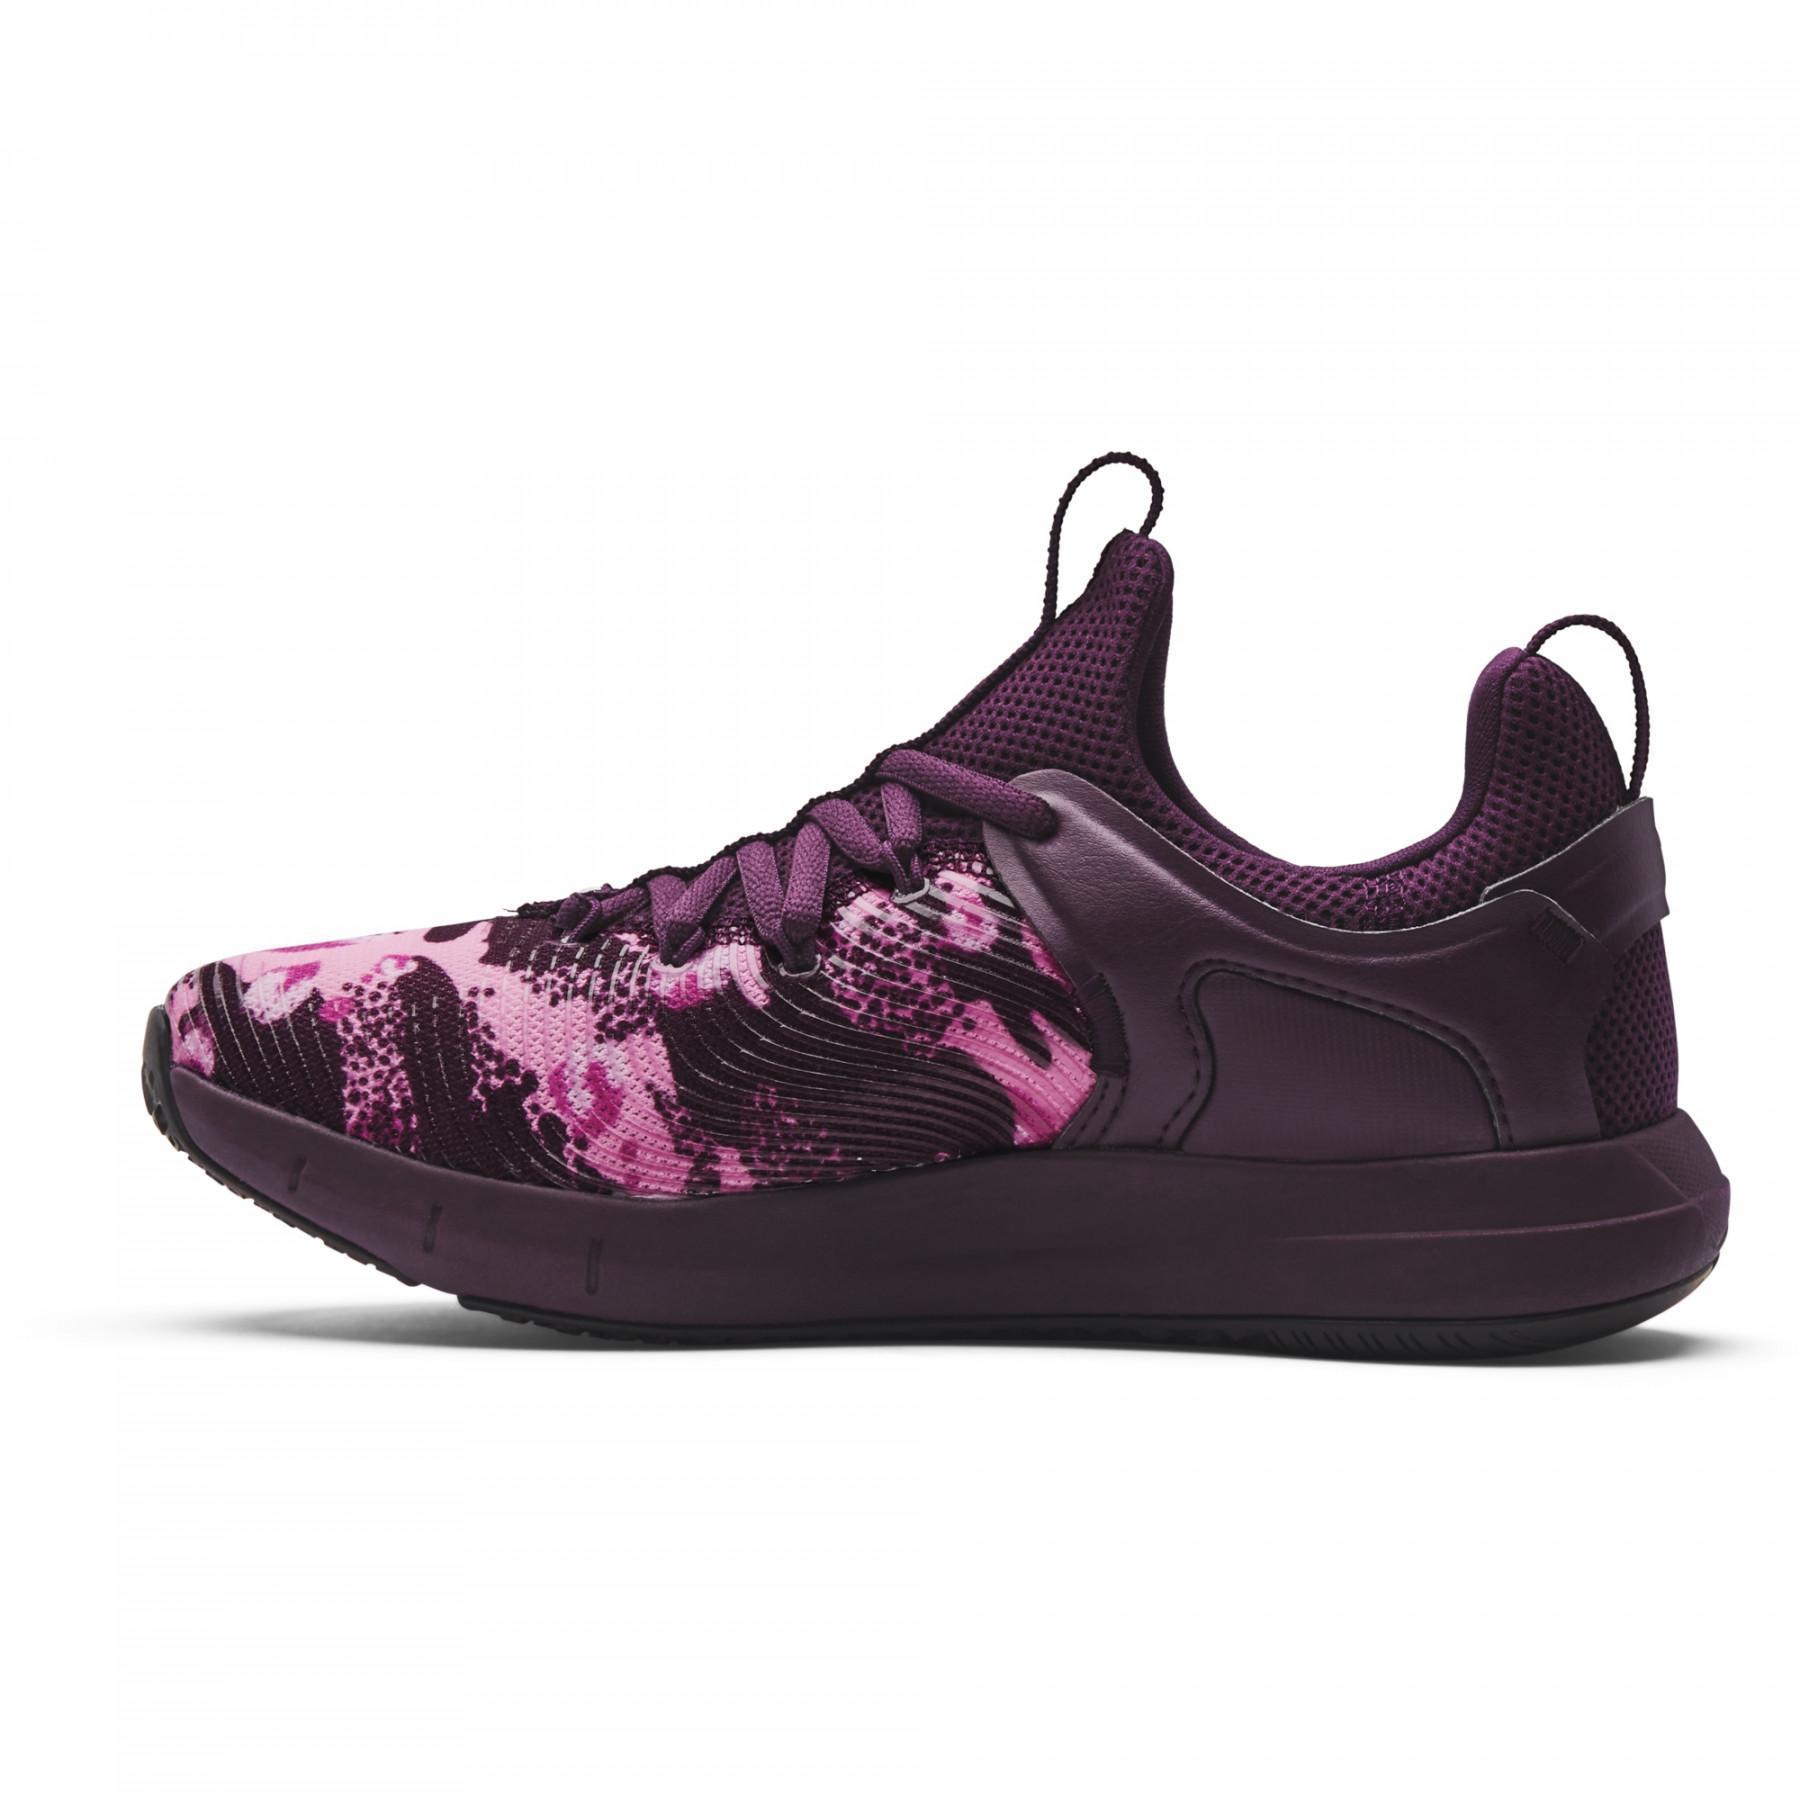 Zapatos de mujer Under Armour HOVR Rise 2 PRNT